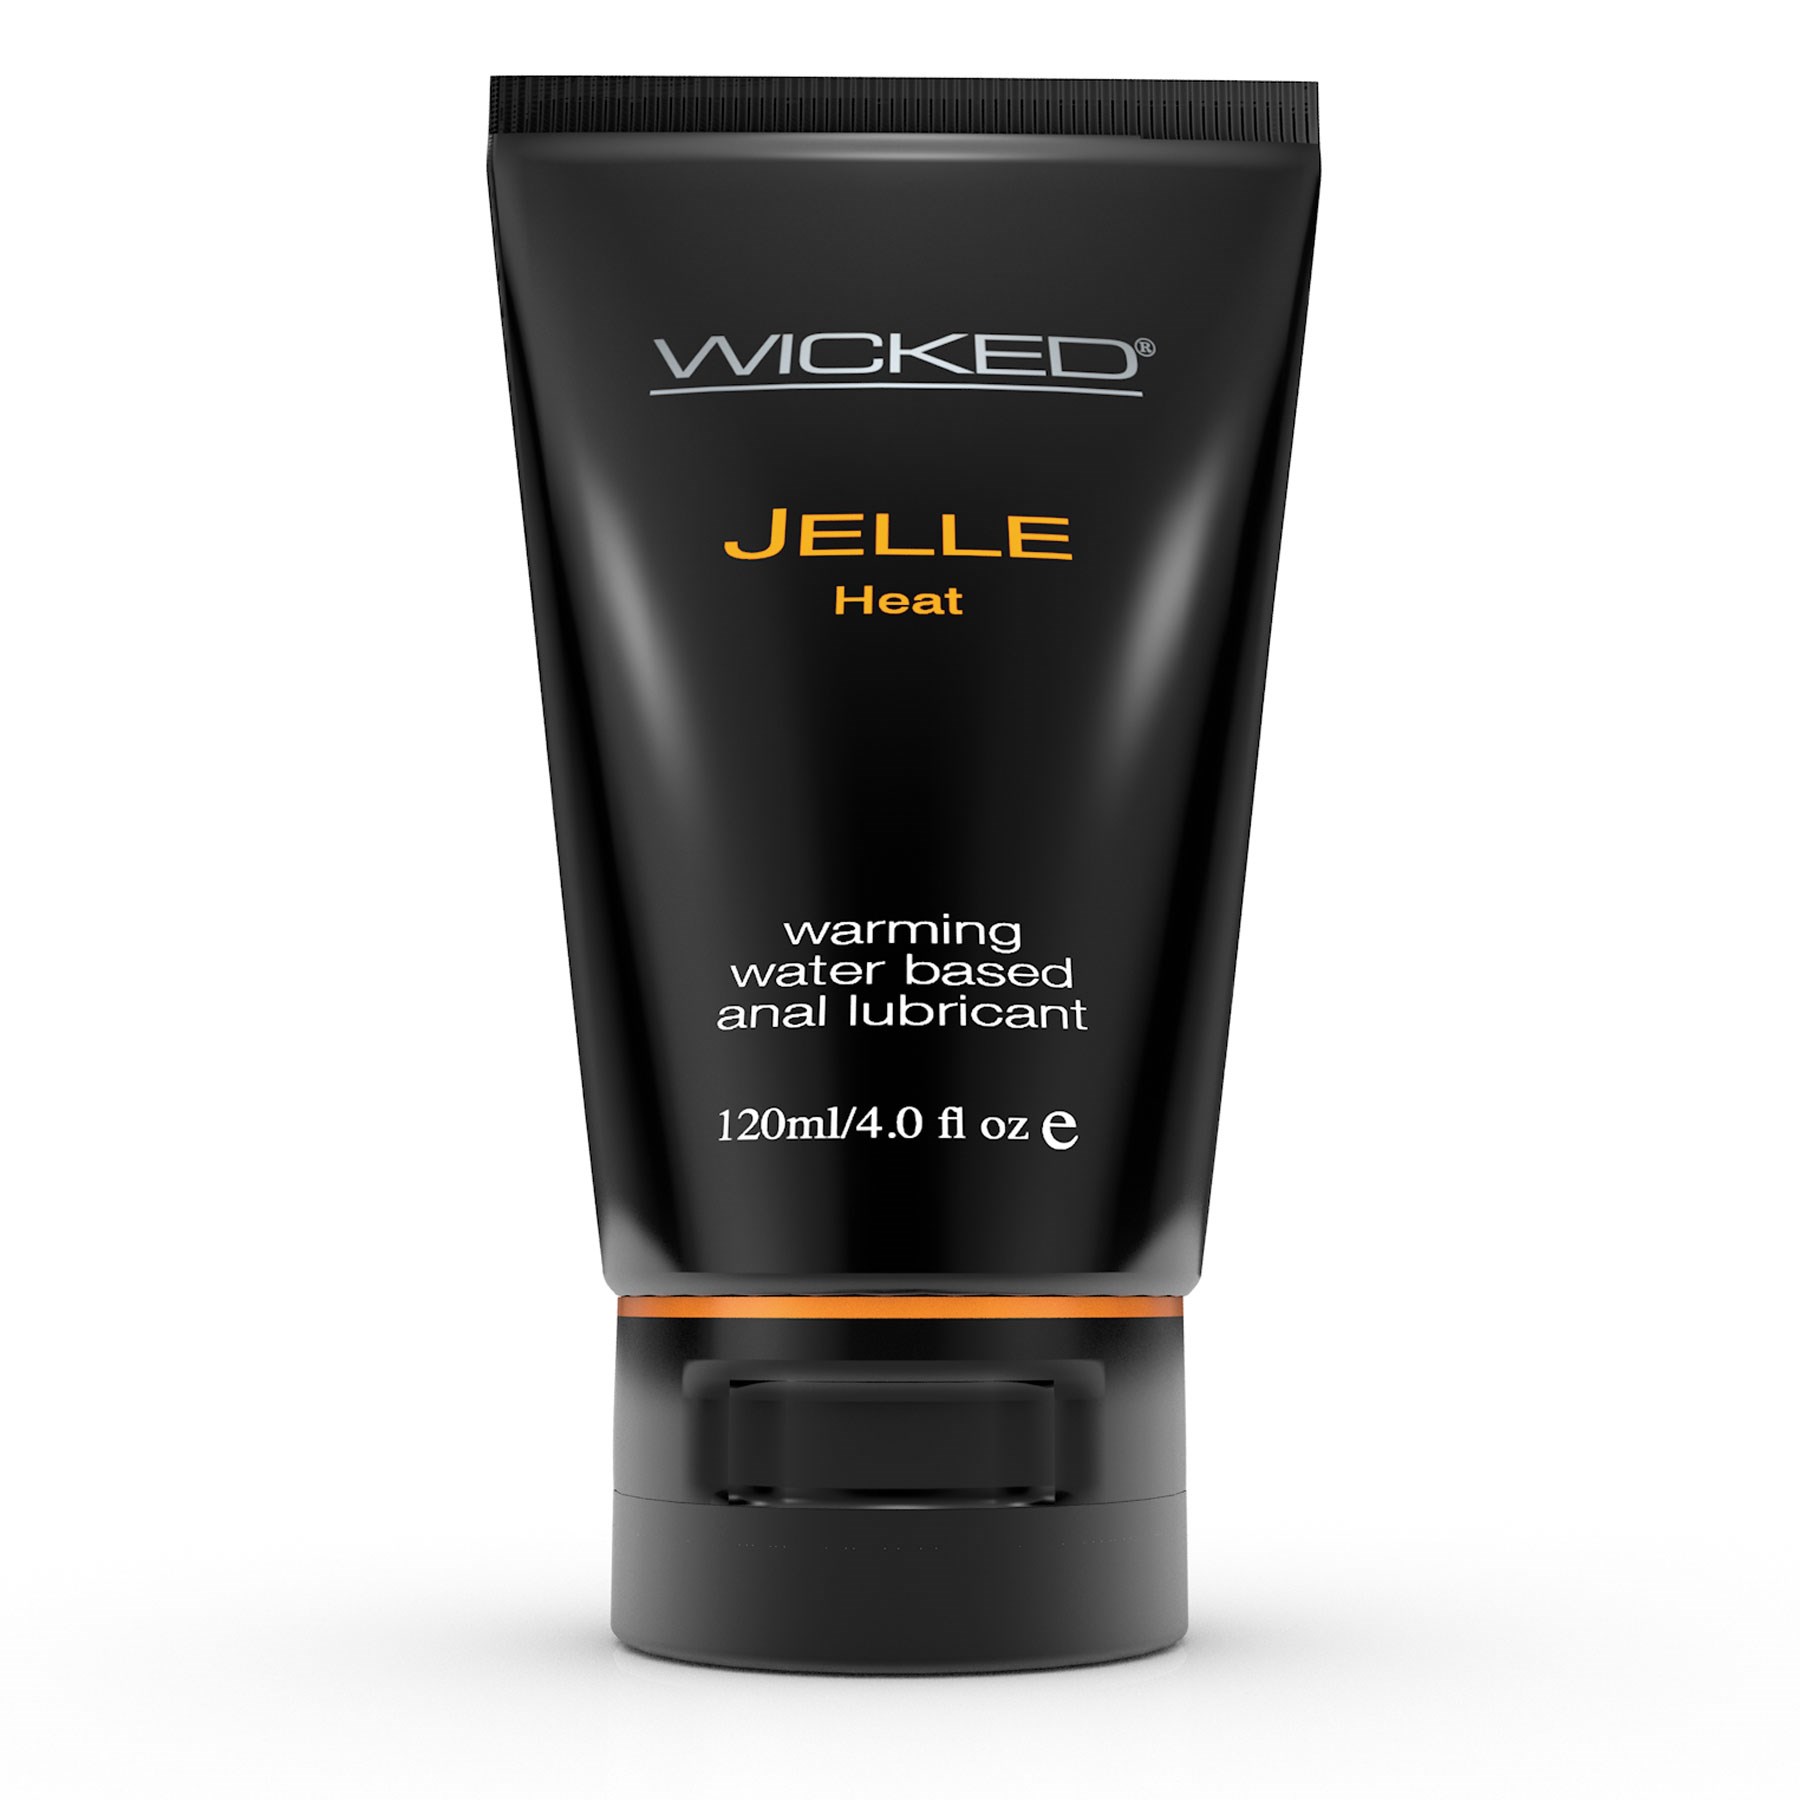 Wicked Anal Jelle Heat Lubricant front of bottle